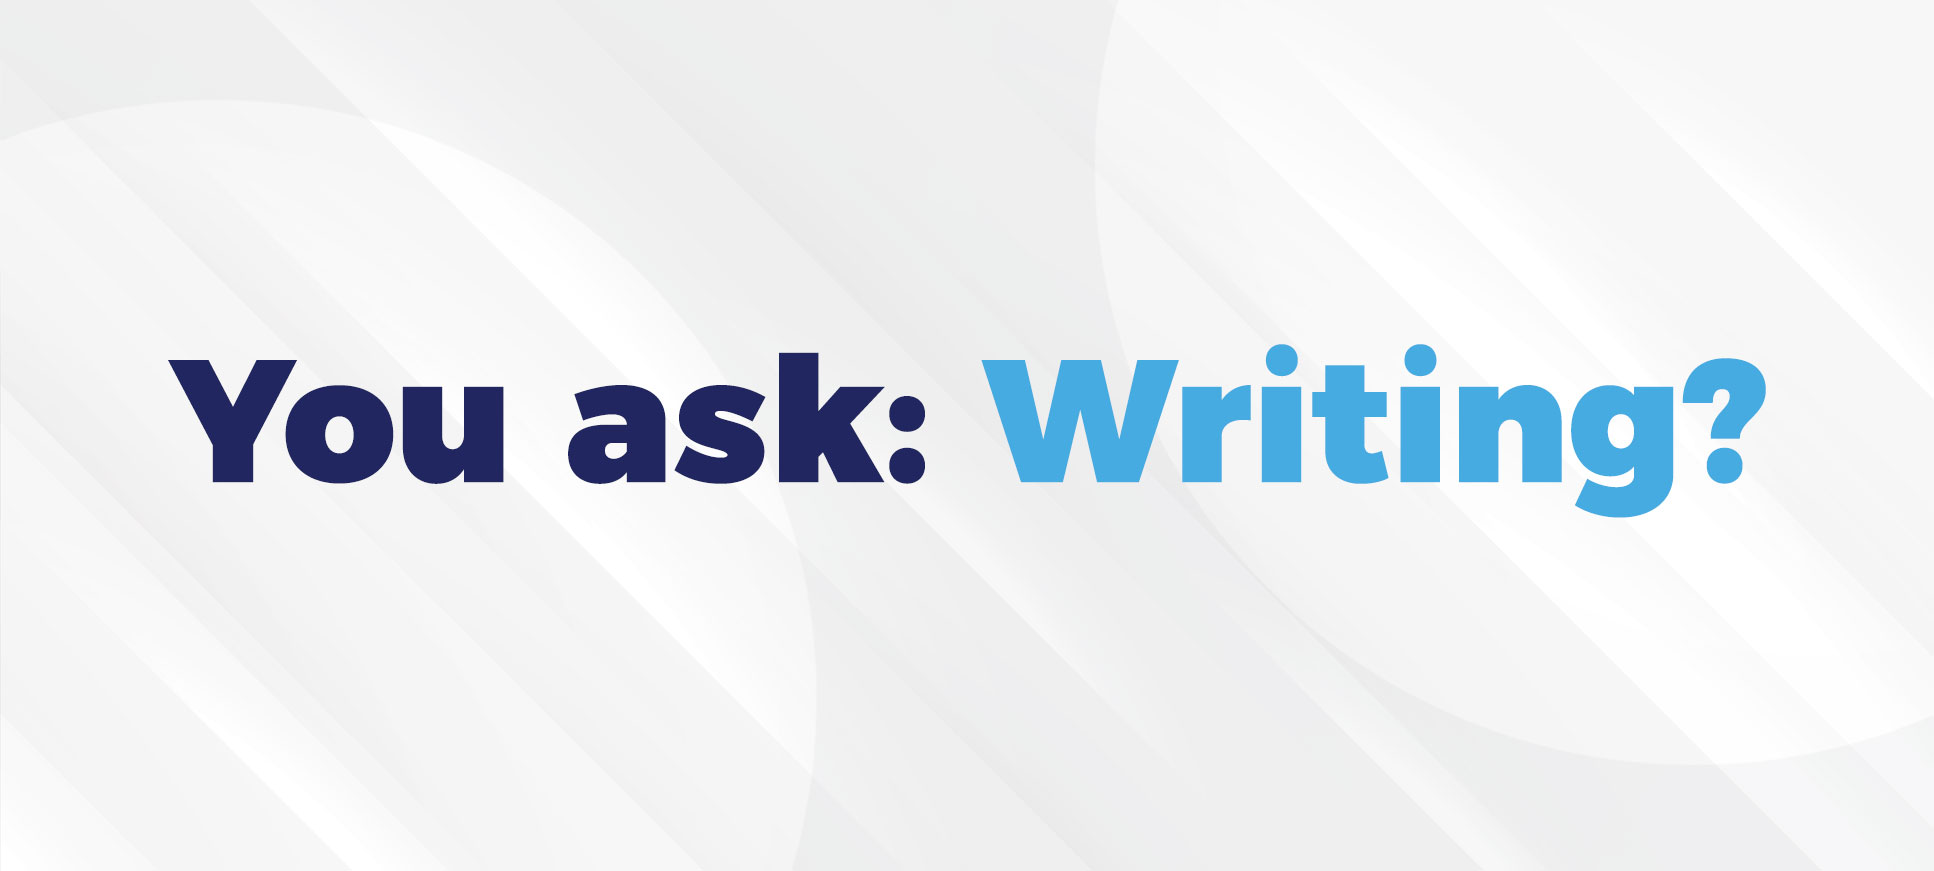 You ask writing - banner